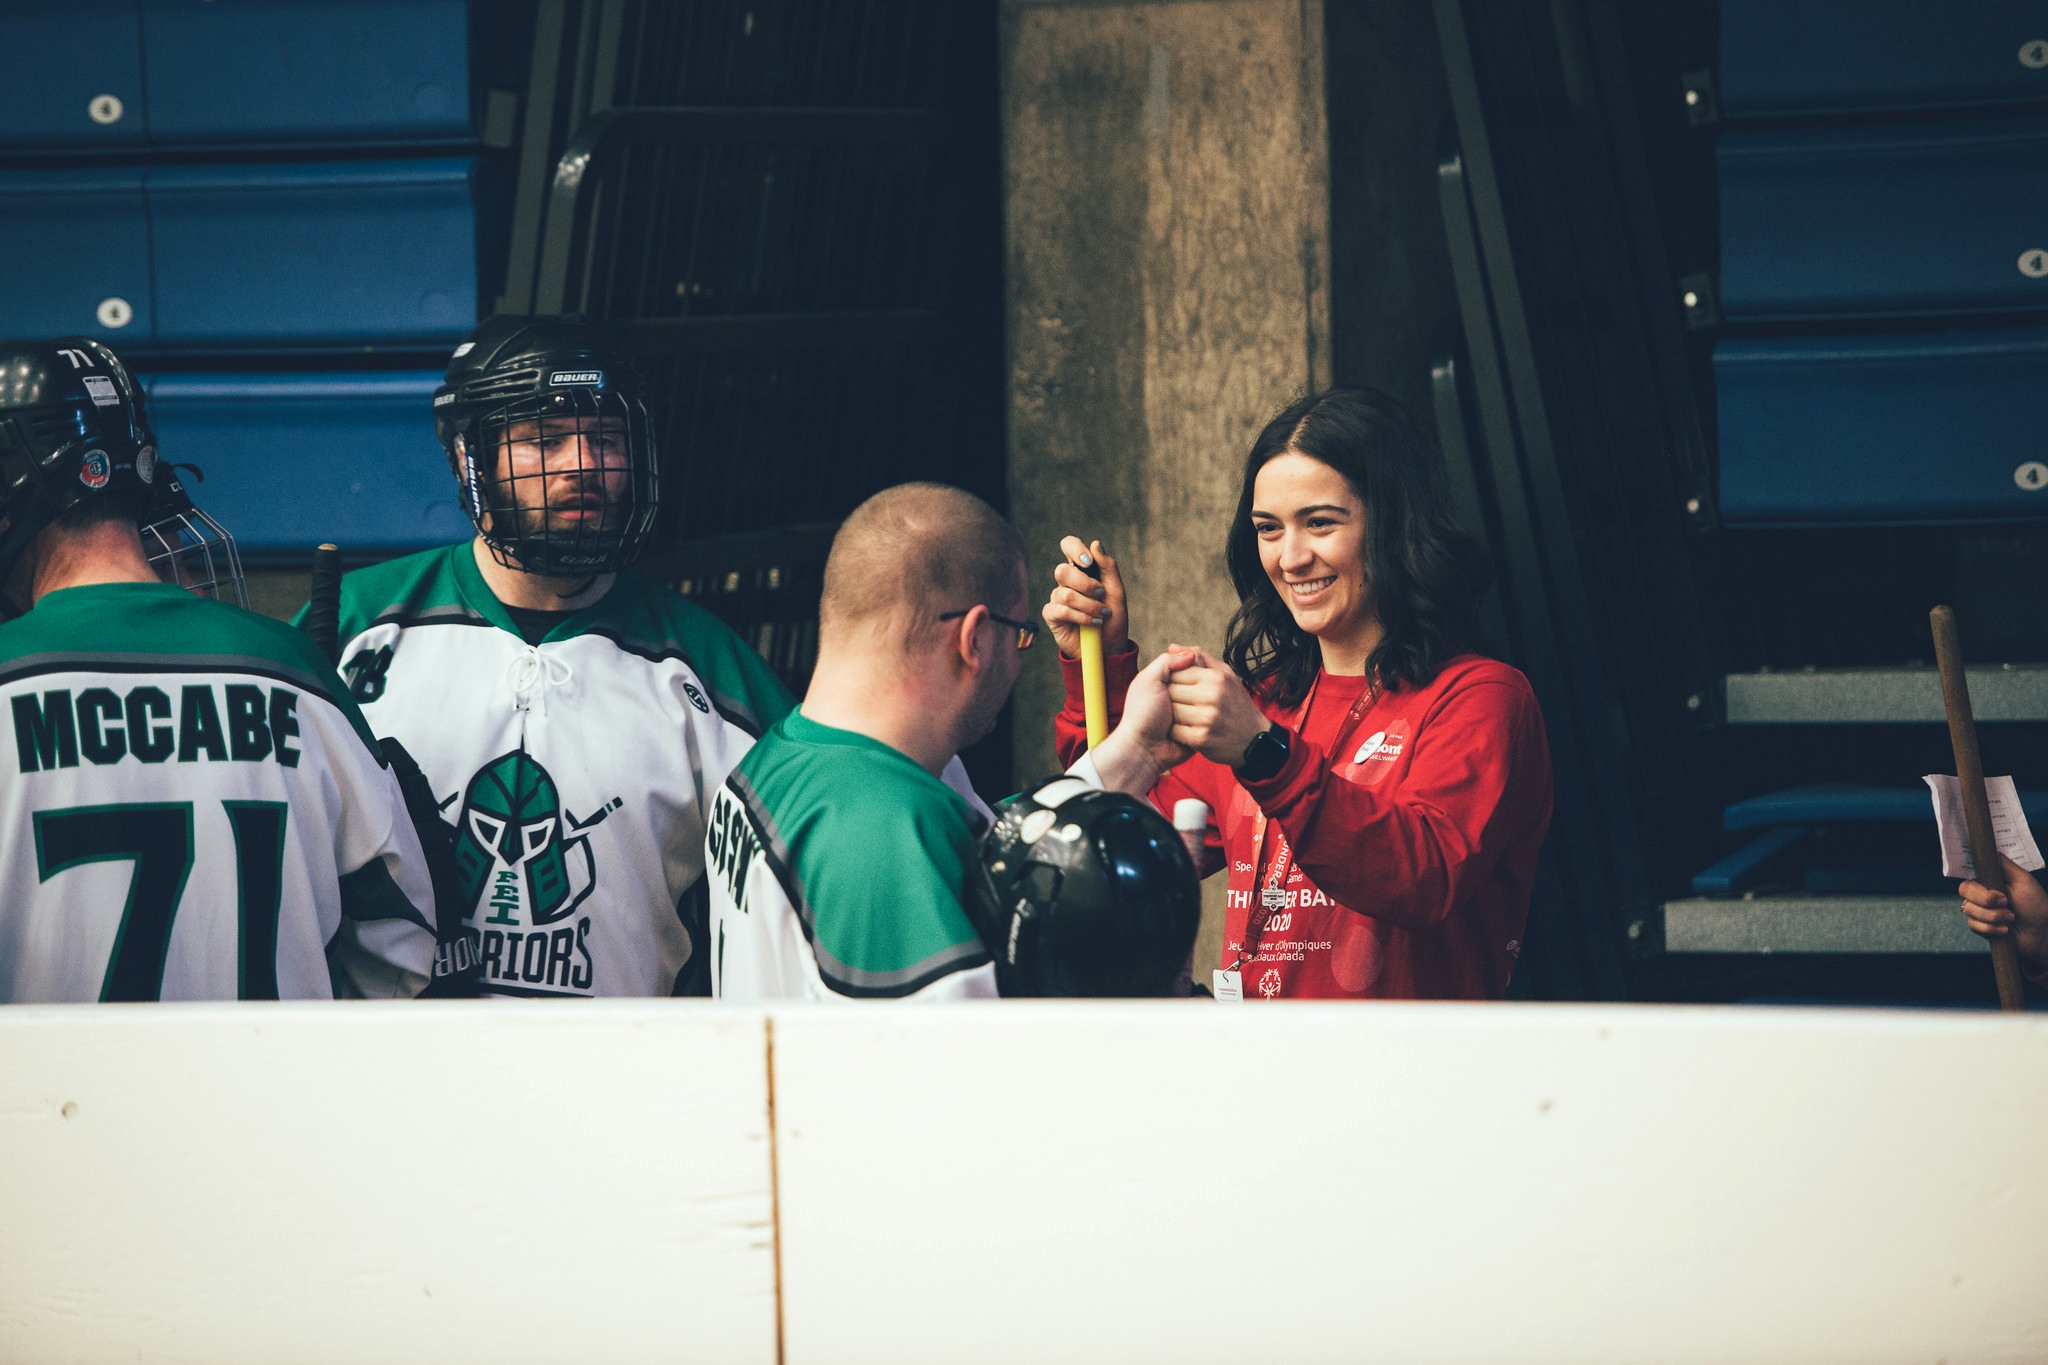 A volunteer cheering with two hockey players